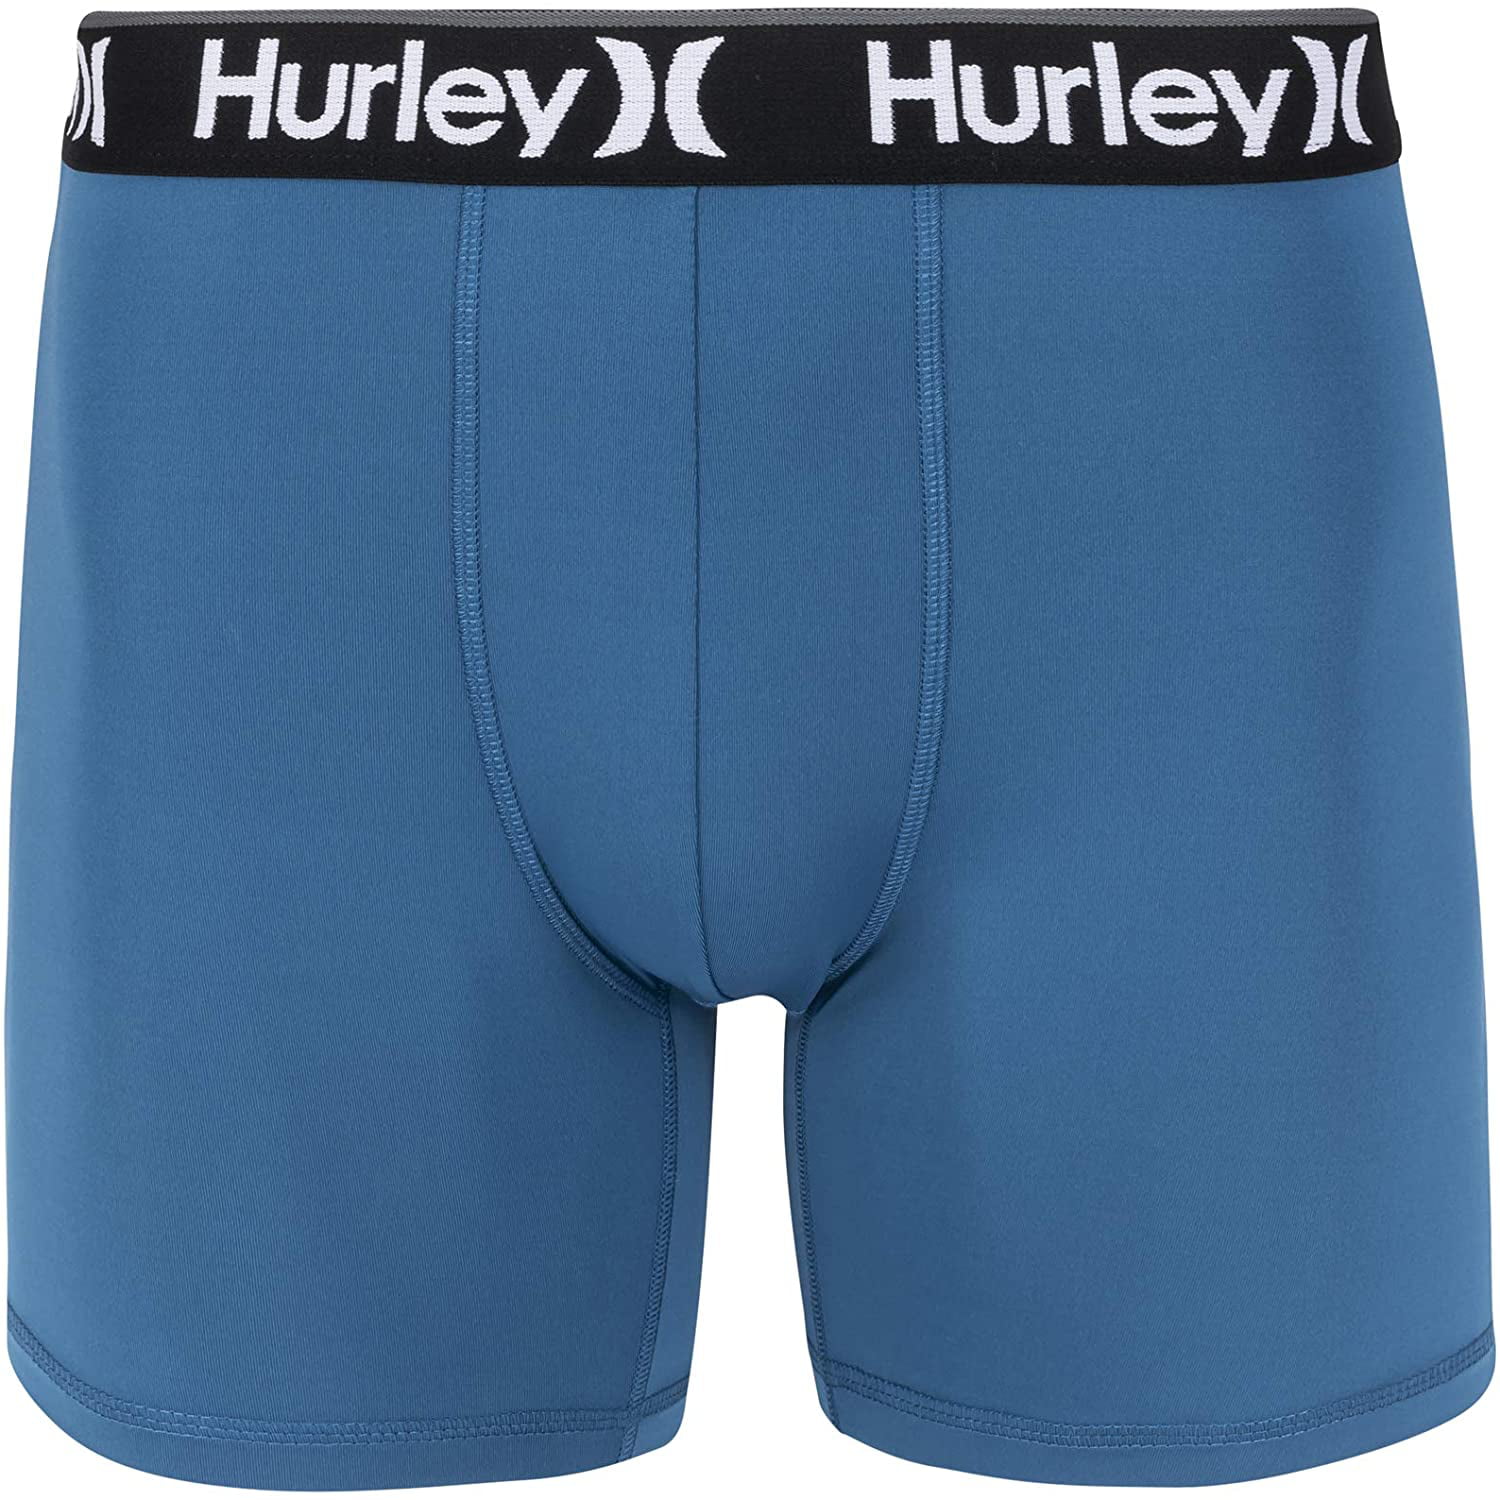 Hurley Men's 3 Pack Regrind Boxer Brief, Industrial Blue, X-Large, 88%  Polyester, 12% Spandex By Visit the Hurley Store